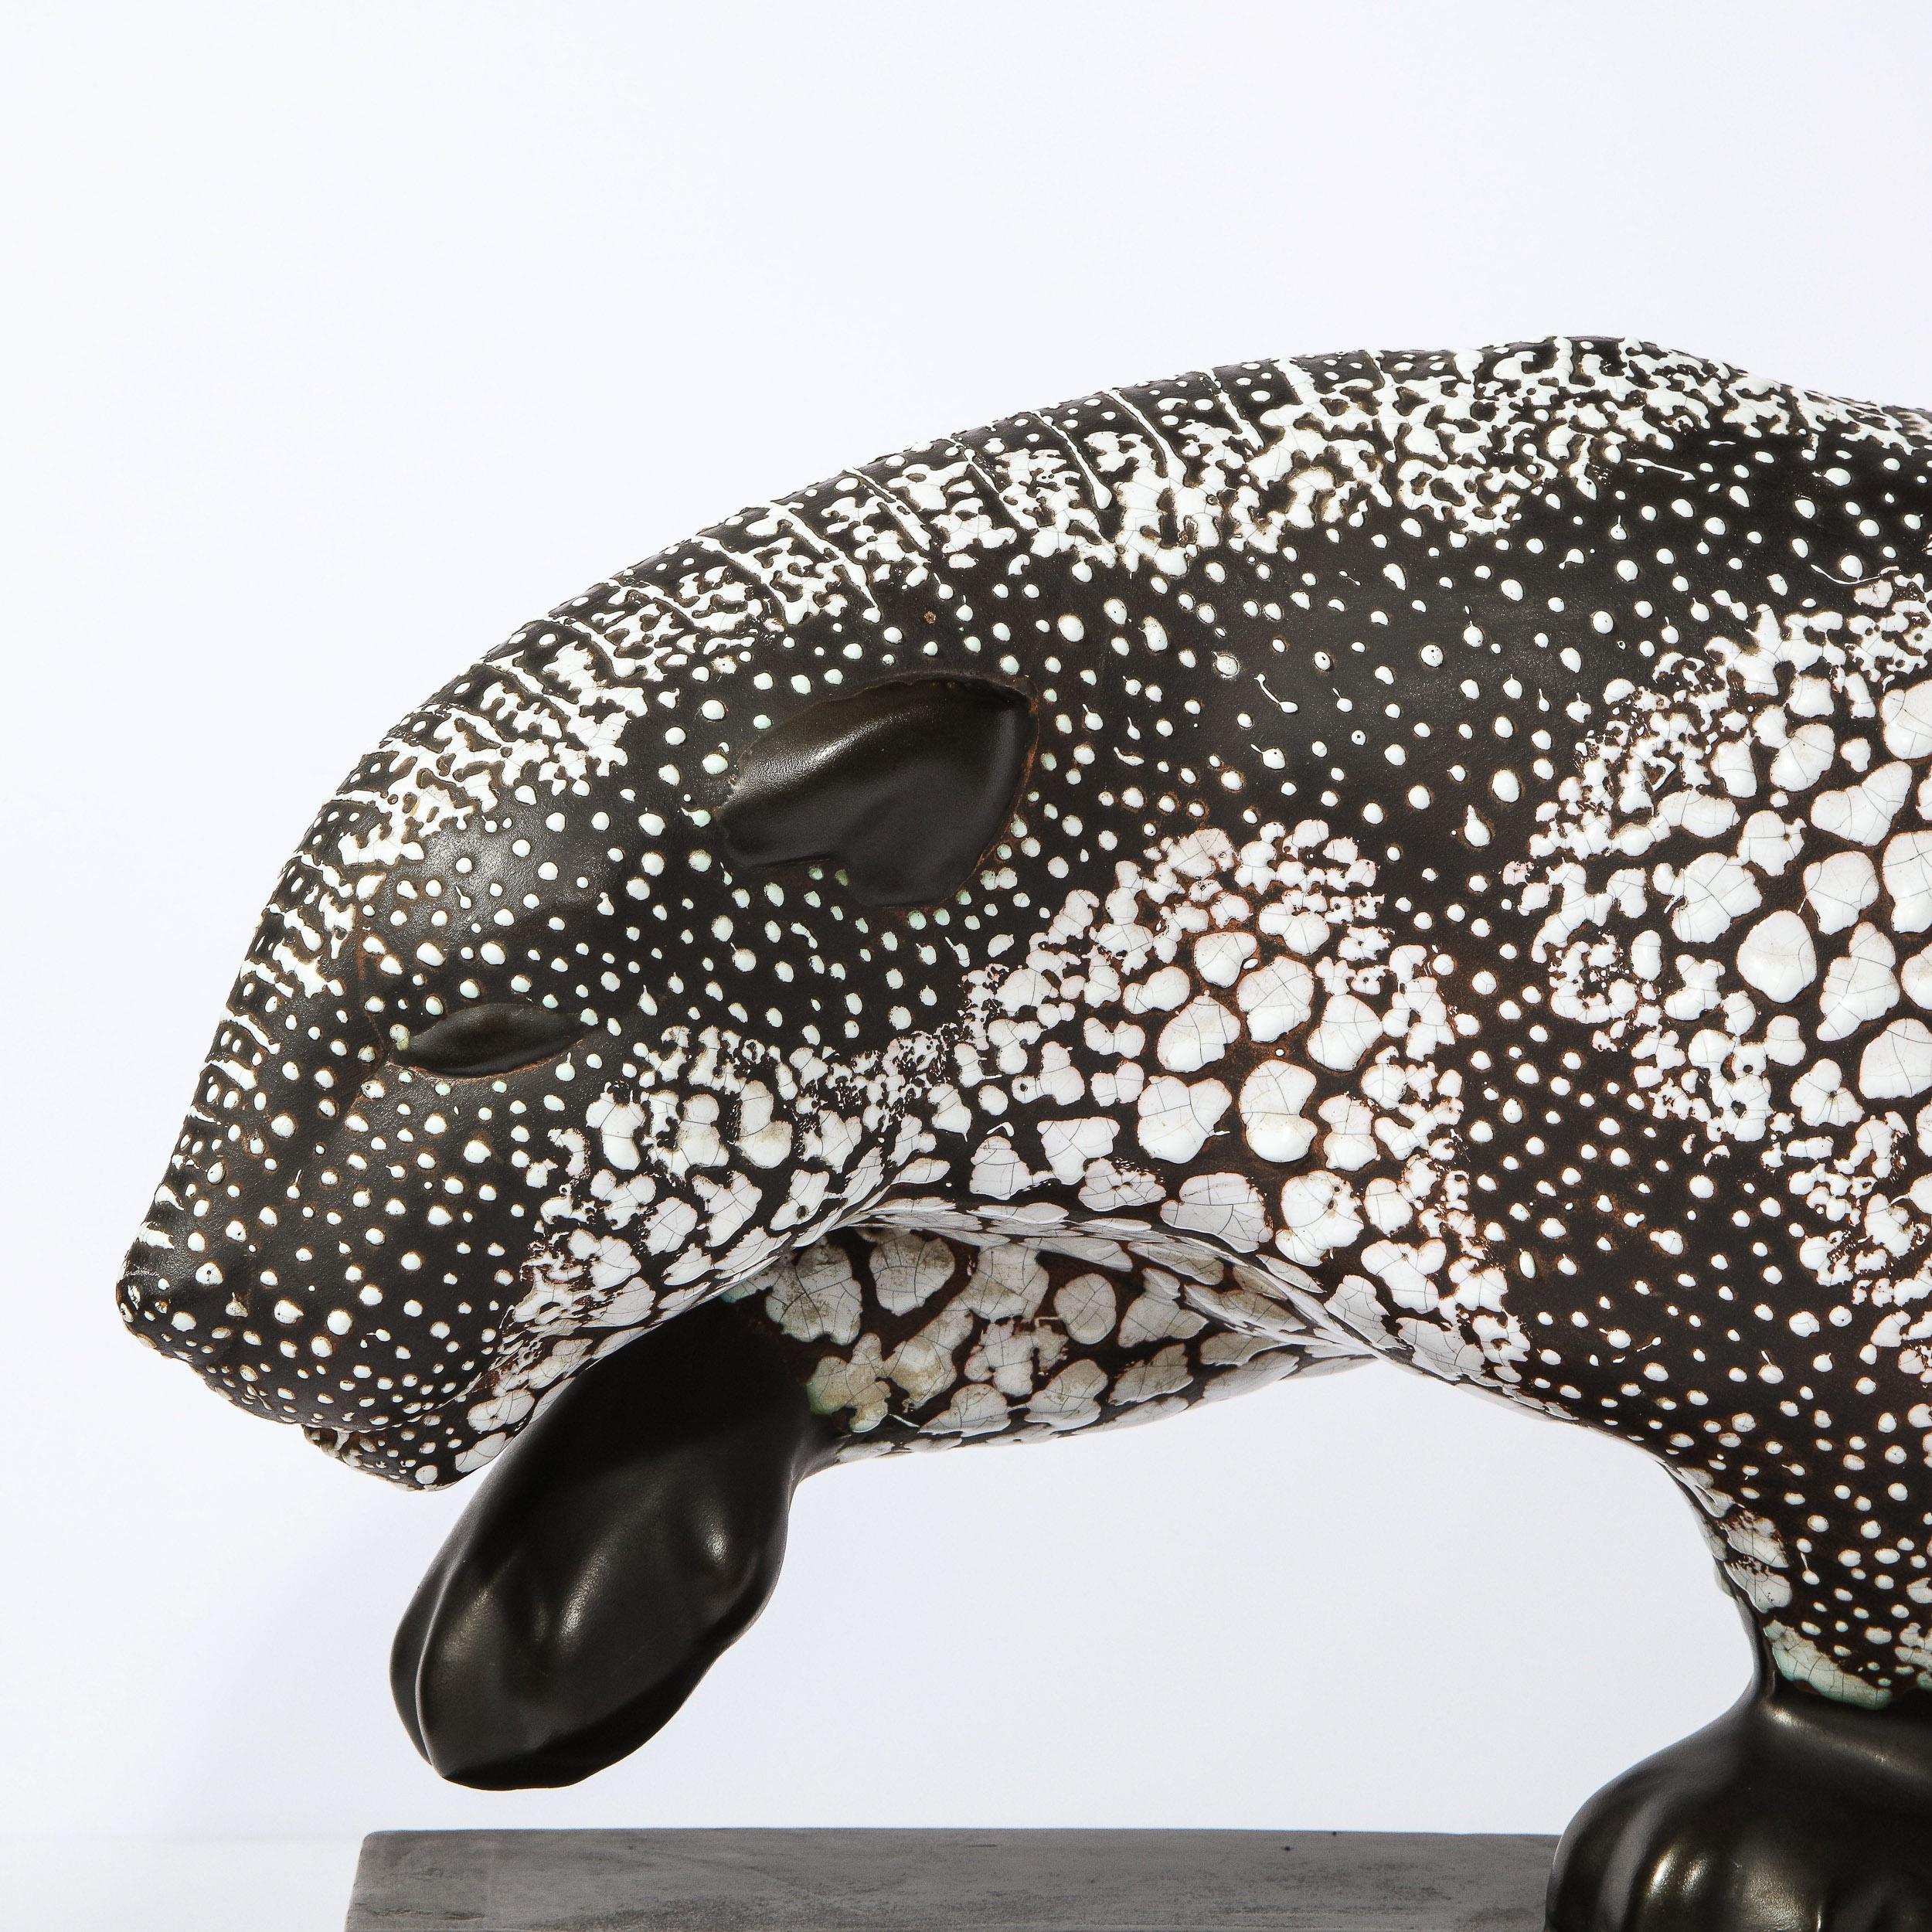 Early 20th Century Art Deco Glazed Ceramic Panther Sculpture Signed E. Pierre for Atelier Primavera